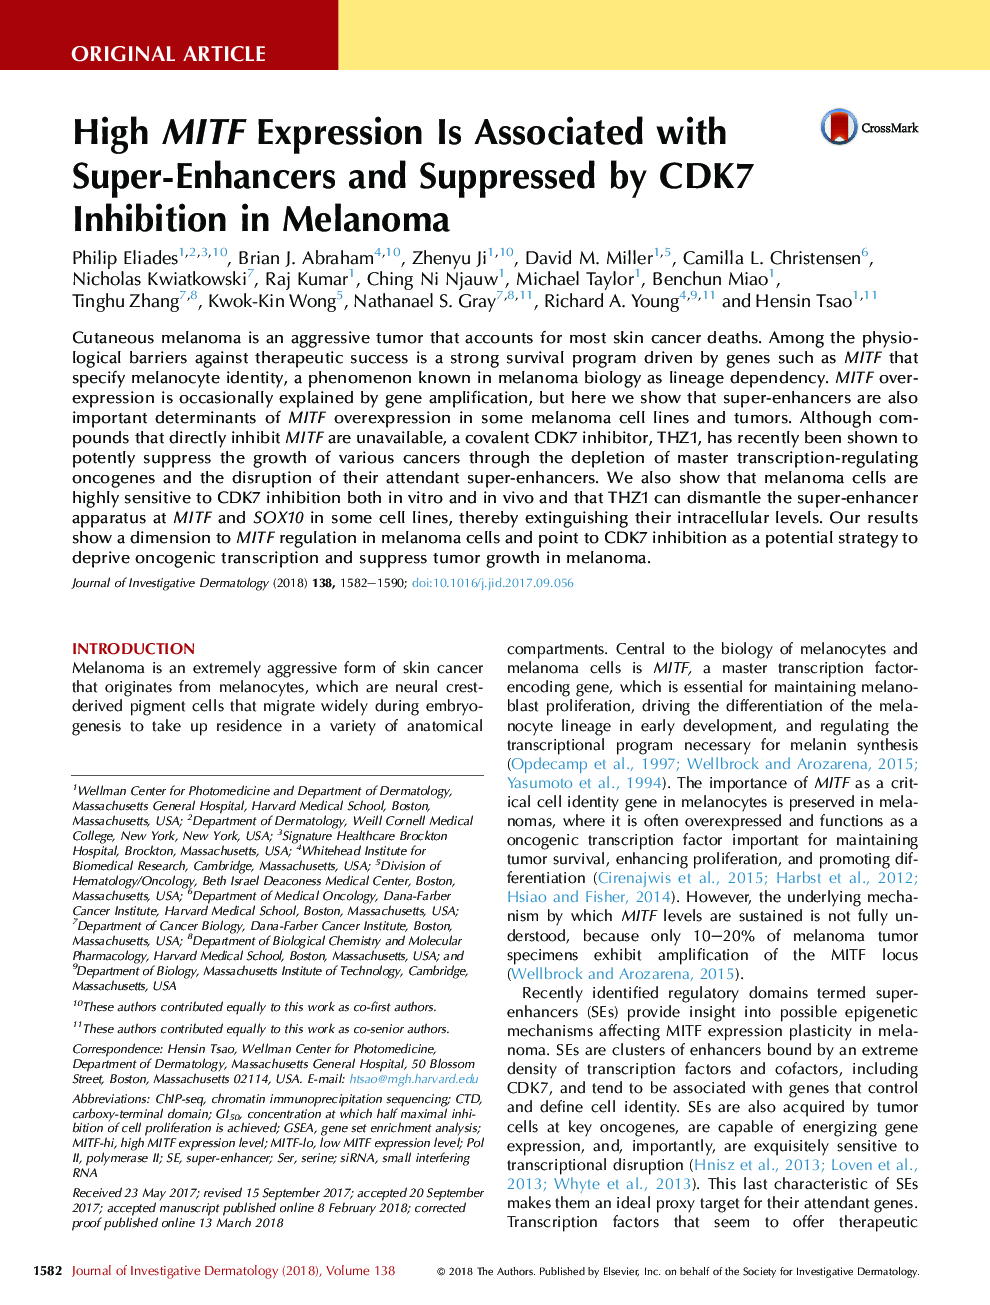 High MITF Expression Is Associated with Super-Enhancers and Suppressed by CDK7 Inhibition in Melanoma